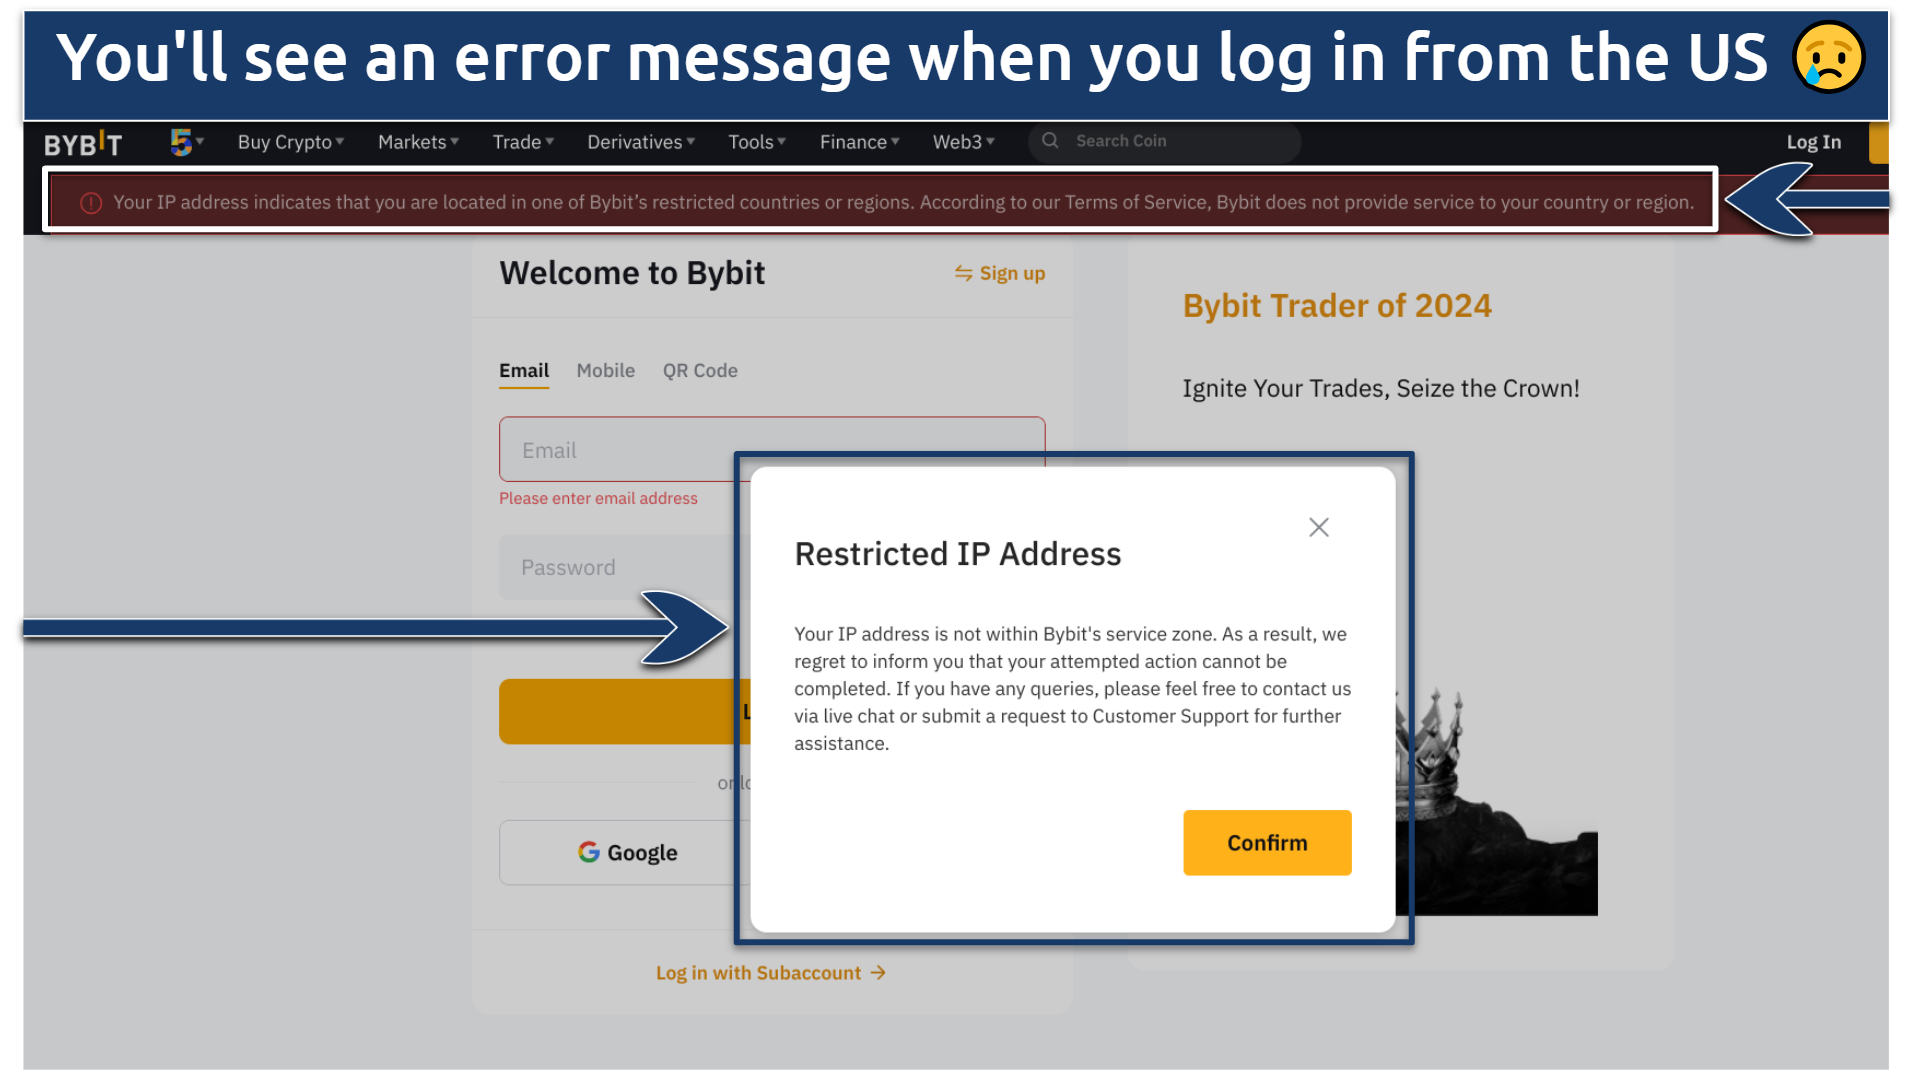 Screenshot of Bybit error code when logging in from a restricted region